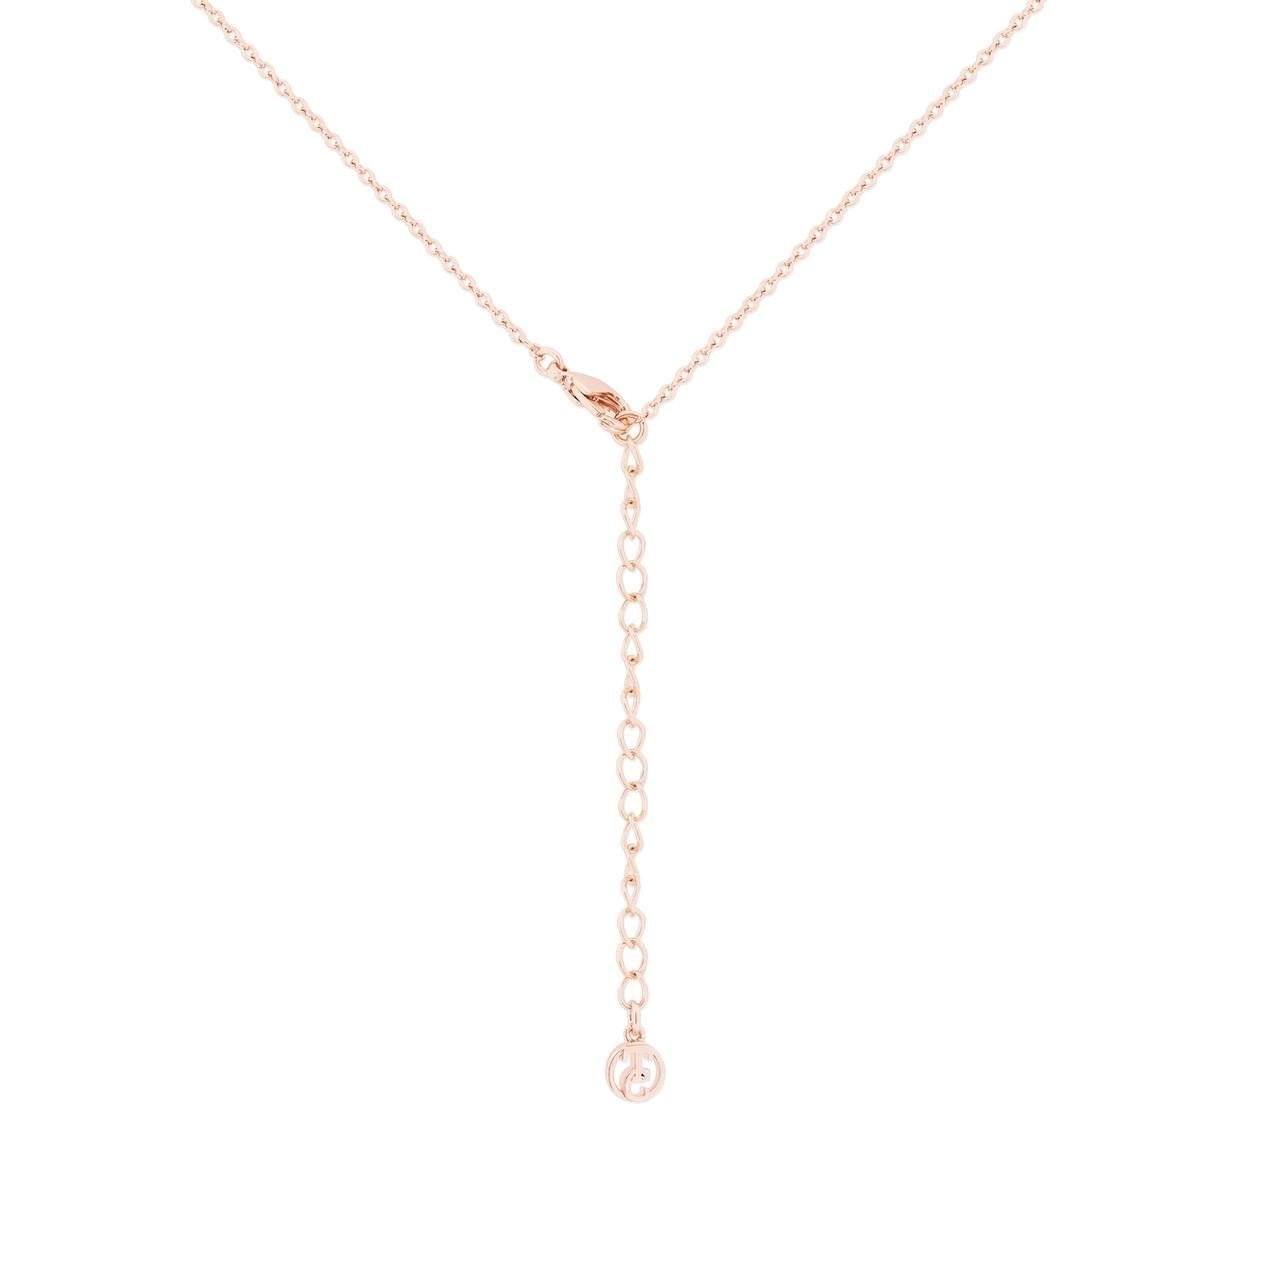 Tipperary Crystal Bumble Bee Rose Gold Hexagonal Pendant - NEW WINTER 2022